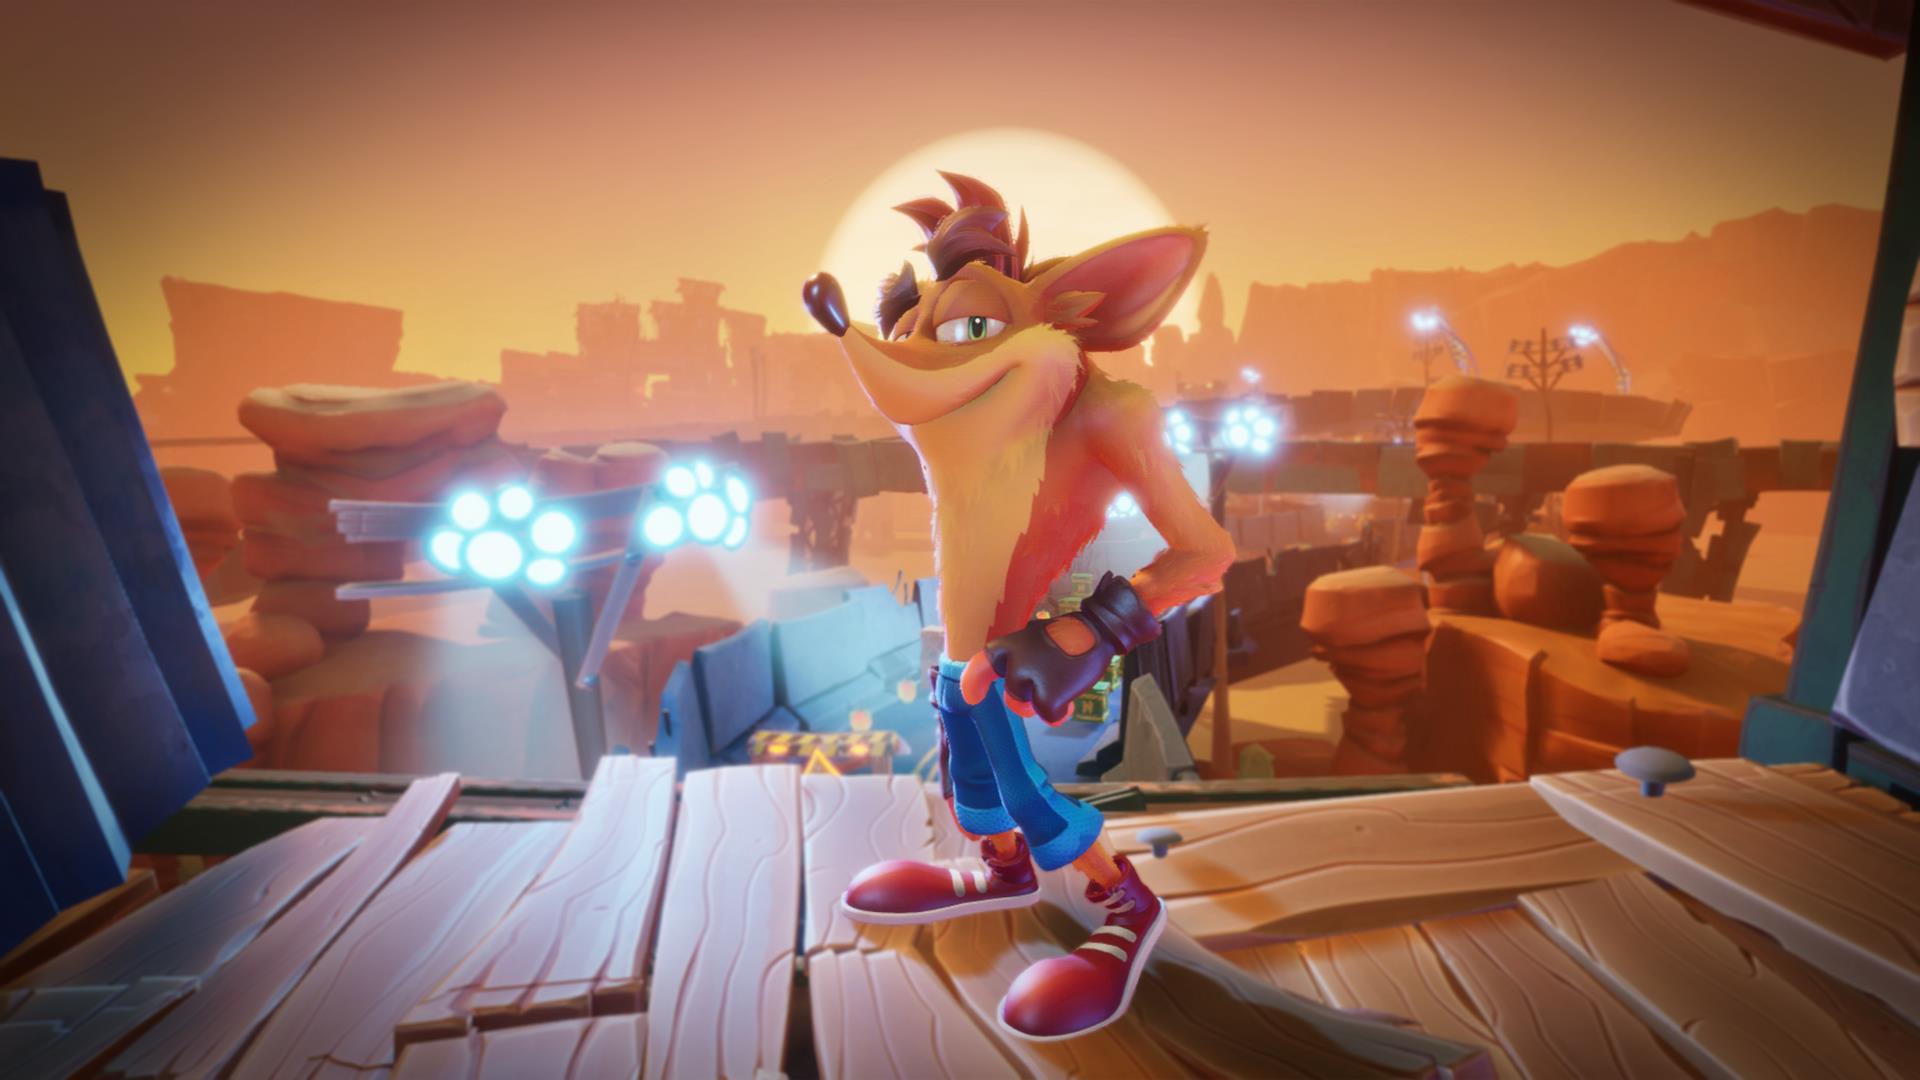 Image for Crash Bandicoot 4: It’s About Time review – doesn't quite live up to its crate expectations